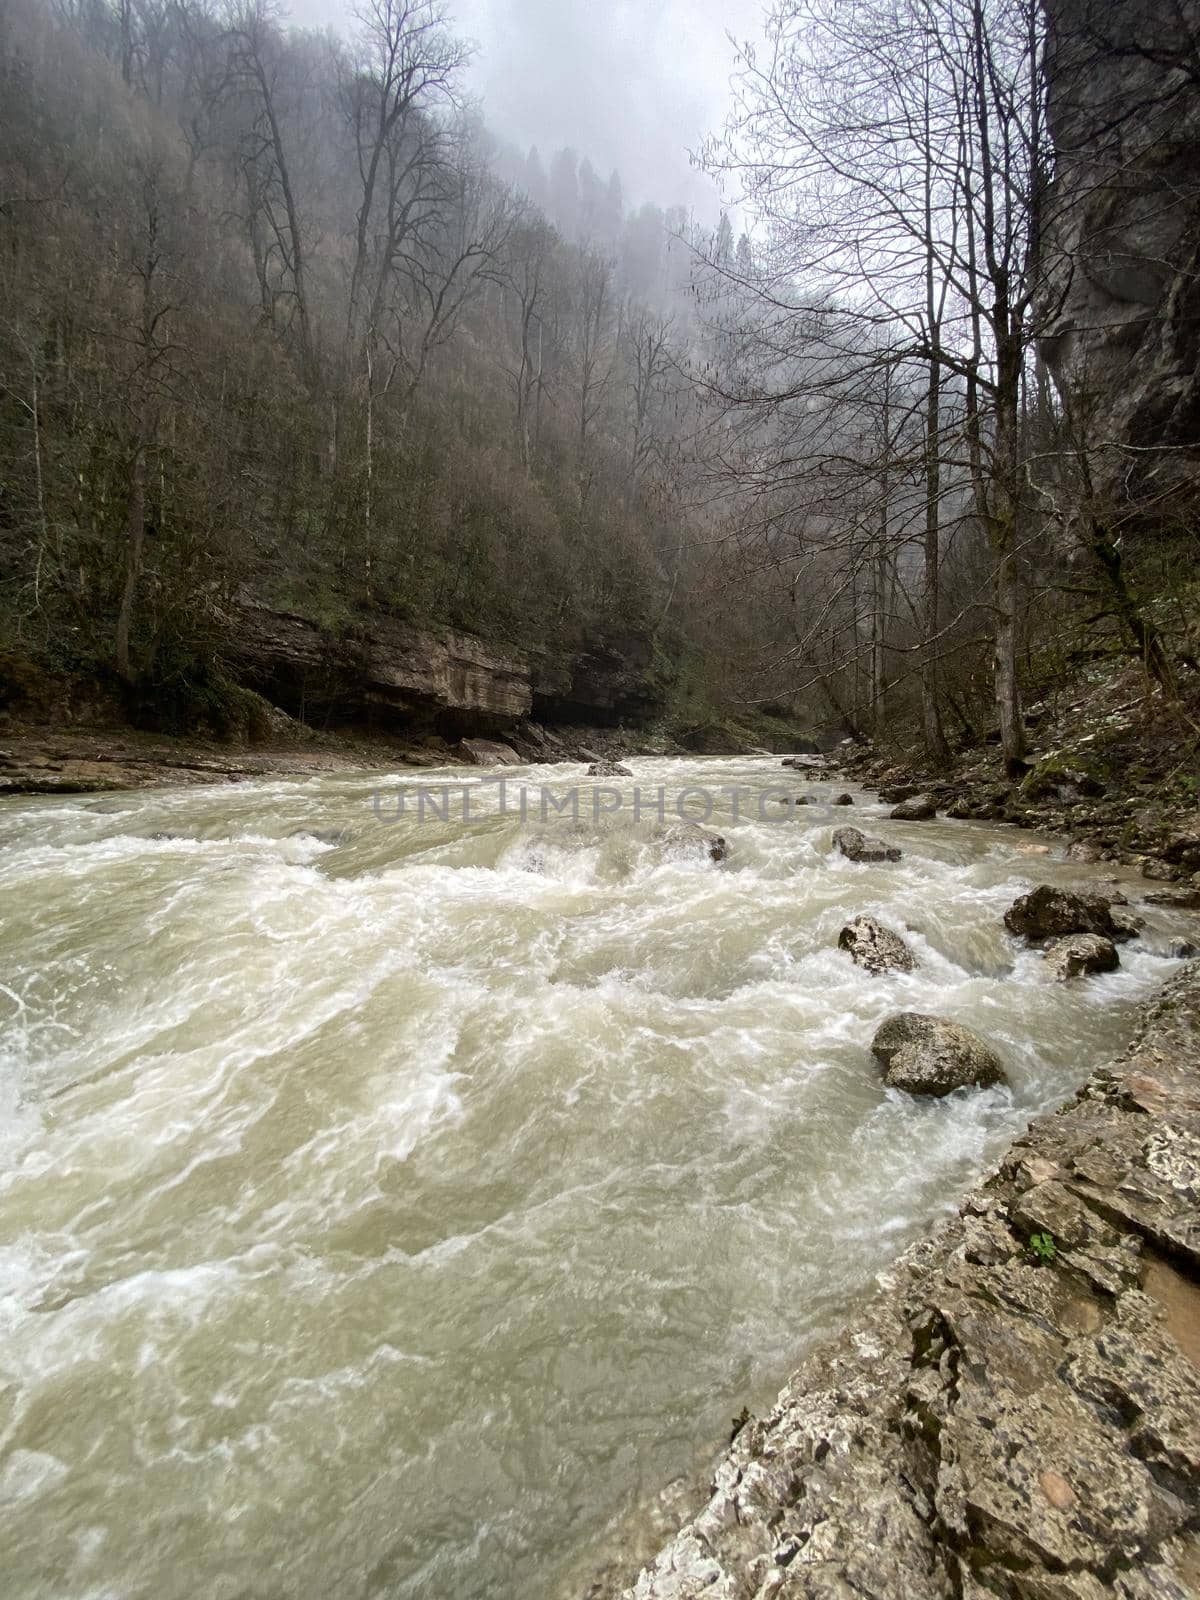 Beautiful landscape of mountain river in amazing and mysterious nature. Mountain waterway flowing through mountainous terrain